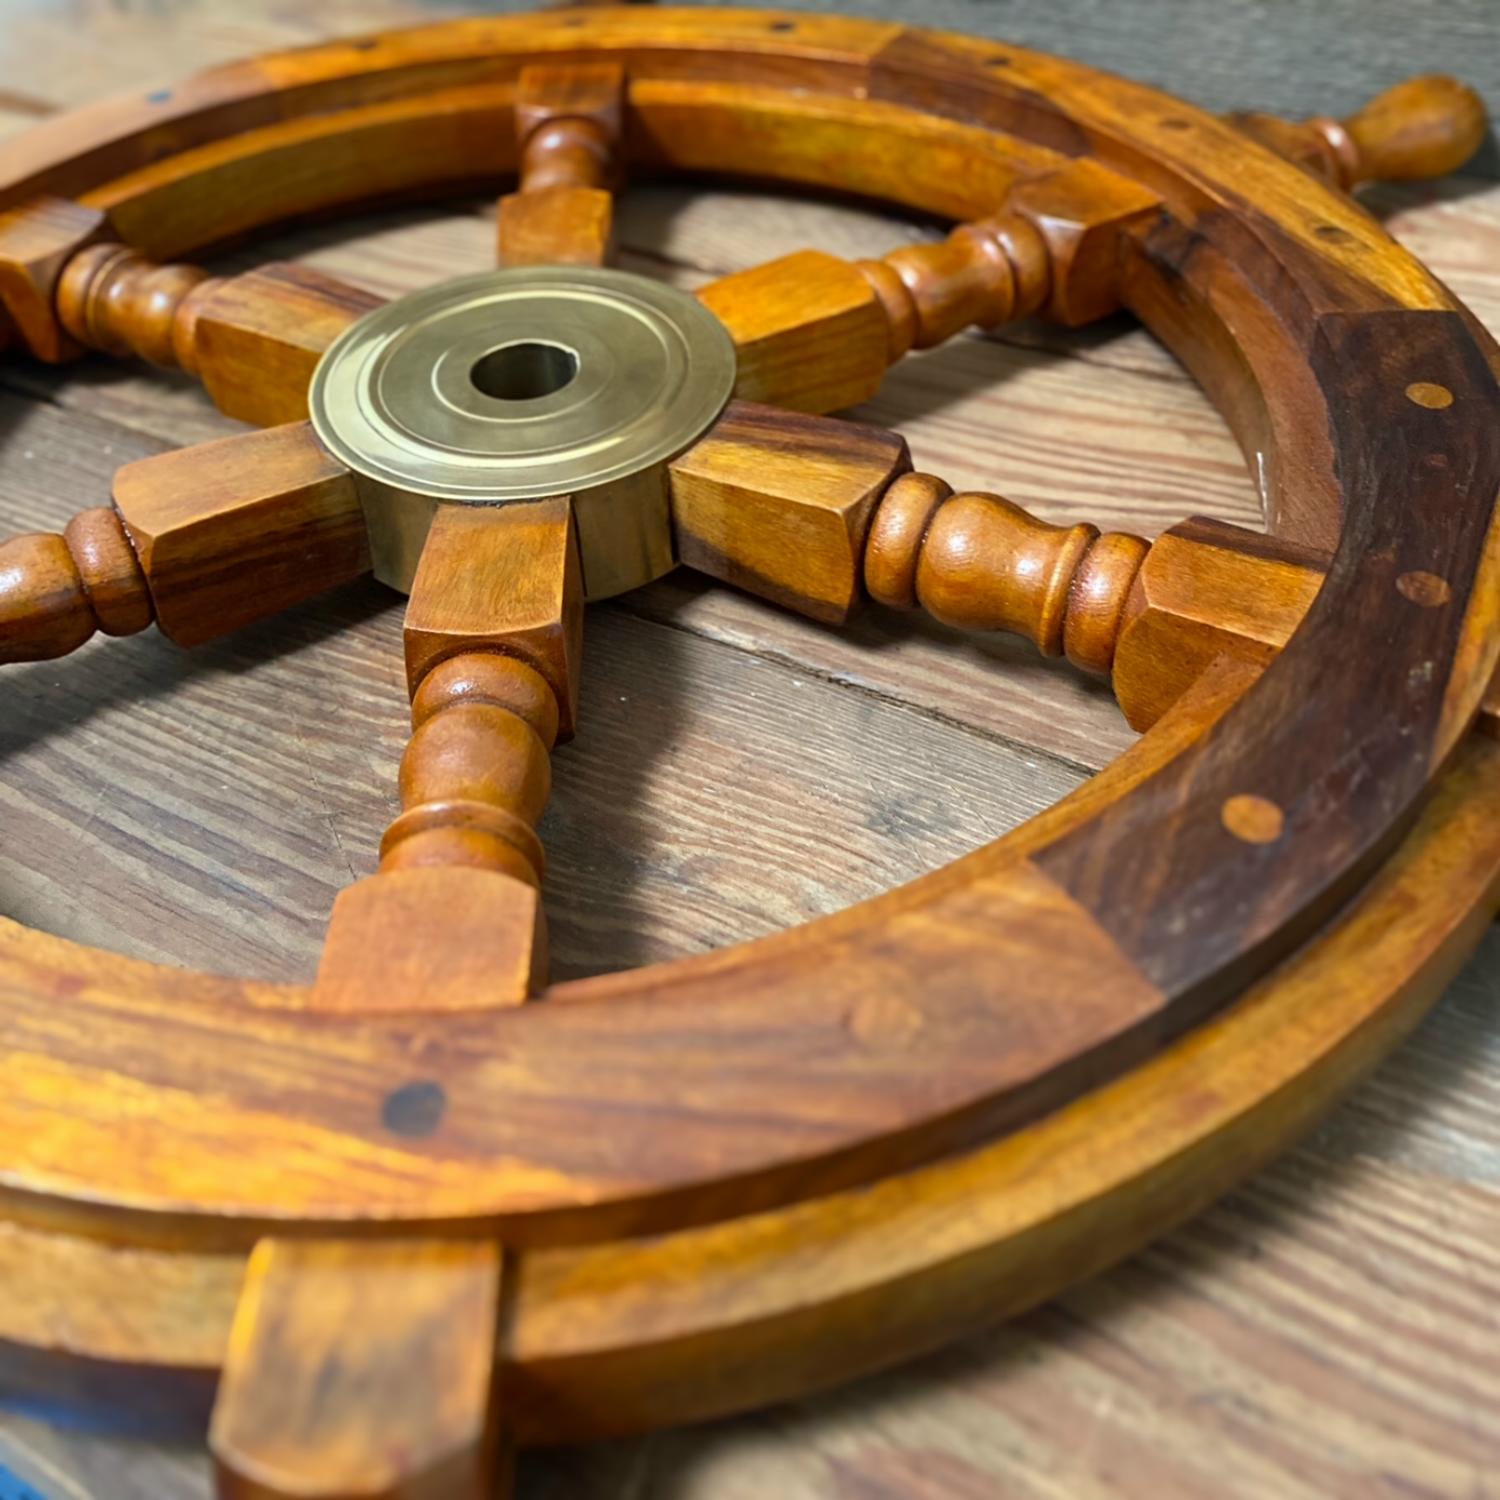 Details about   Antique brass 24" wooden ship's wheel collectible nautical wall decor gift item 